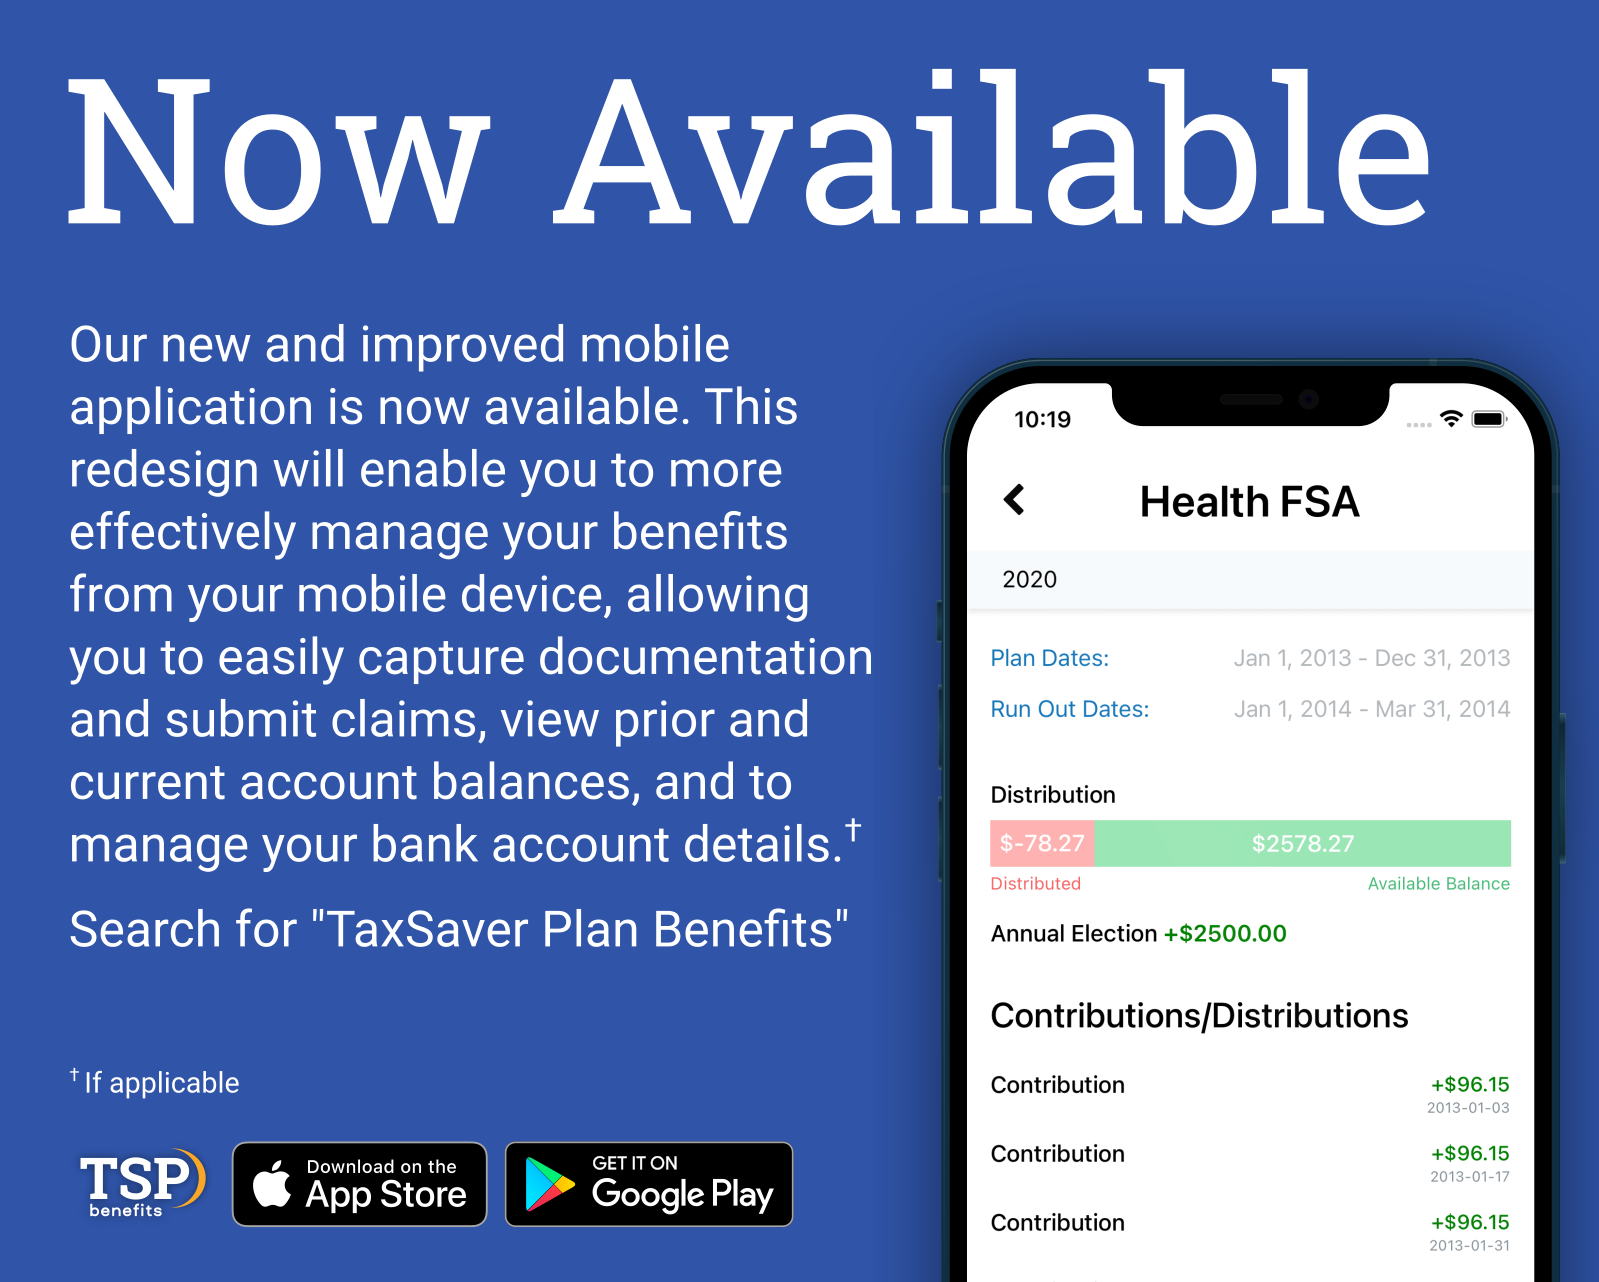 Download the TaxSaver Plan Mobile Application